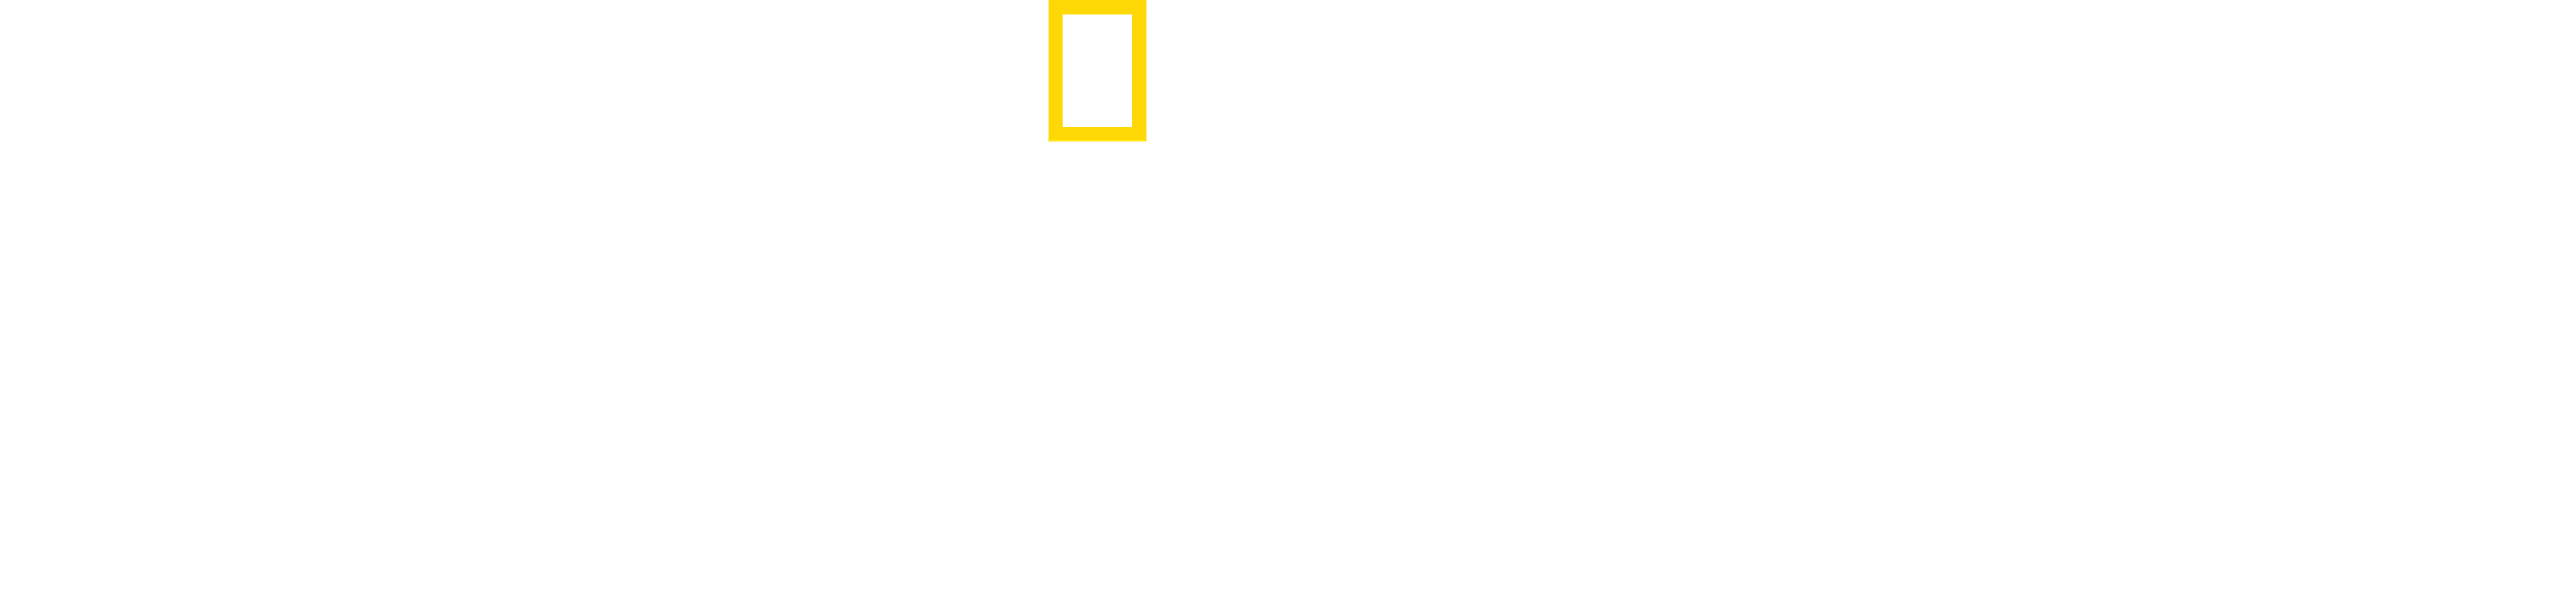 The Long Road Home logo